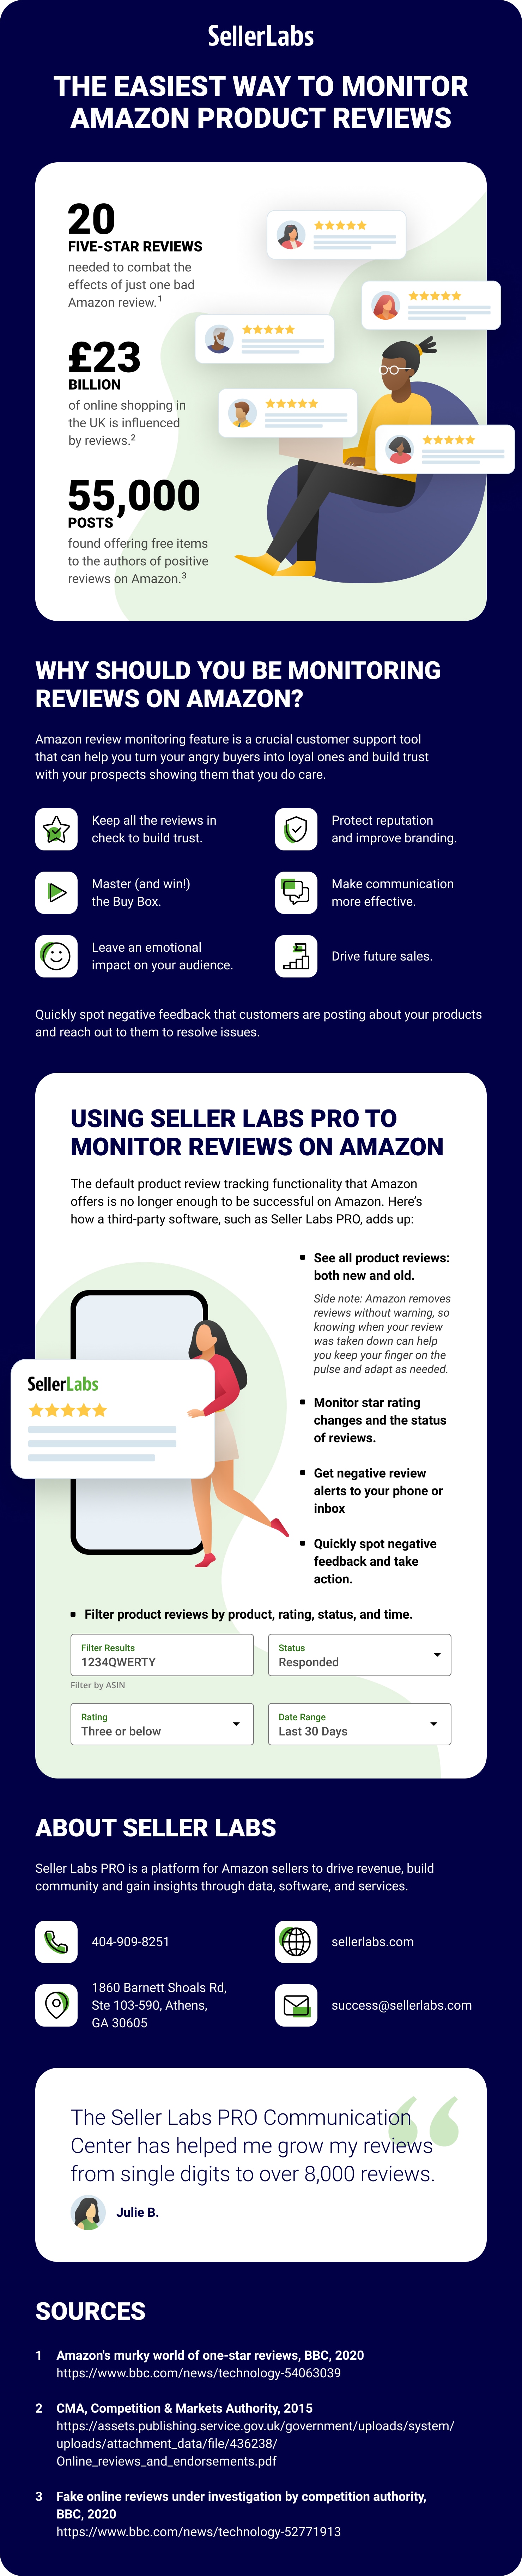 The Easiest Way to Monitor Amazon Product Reviews